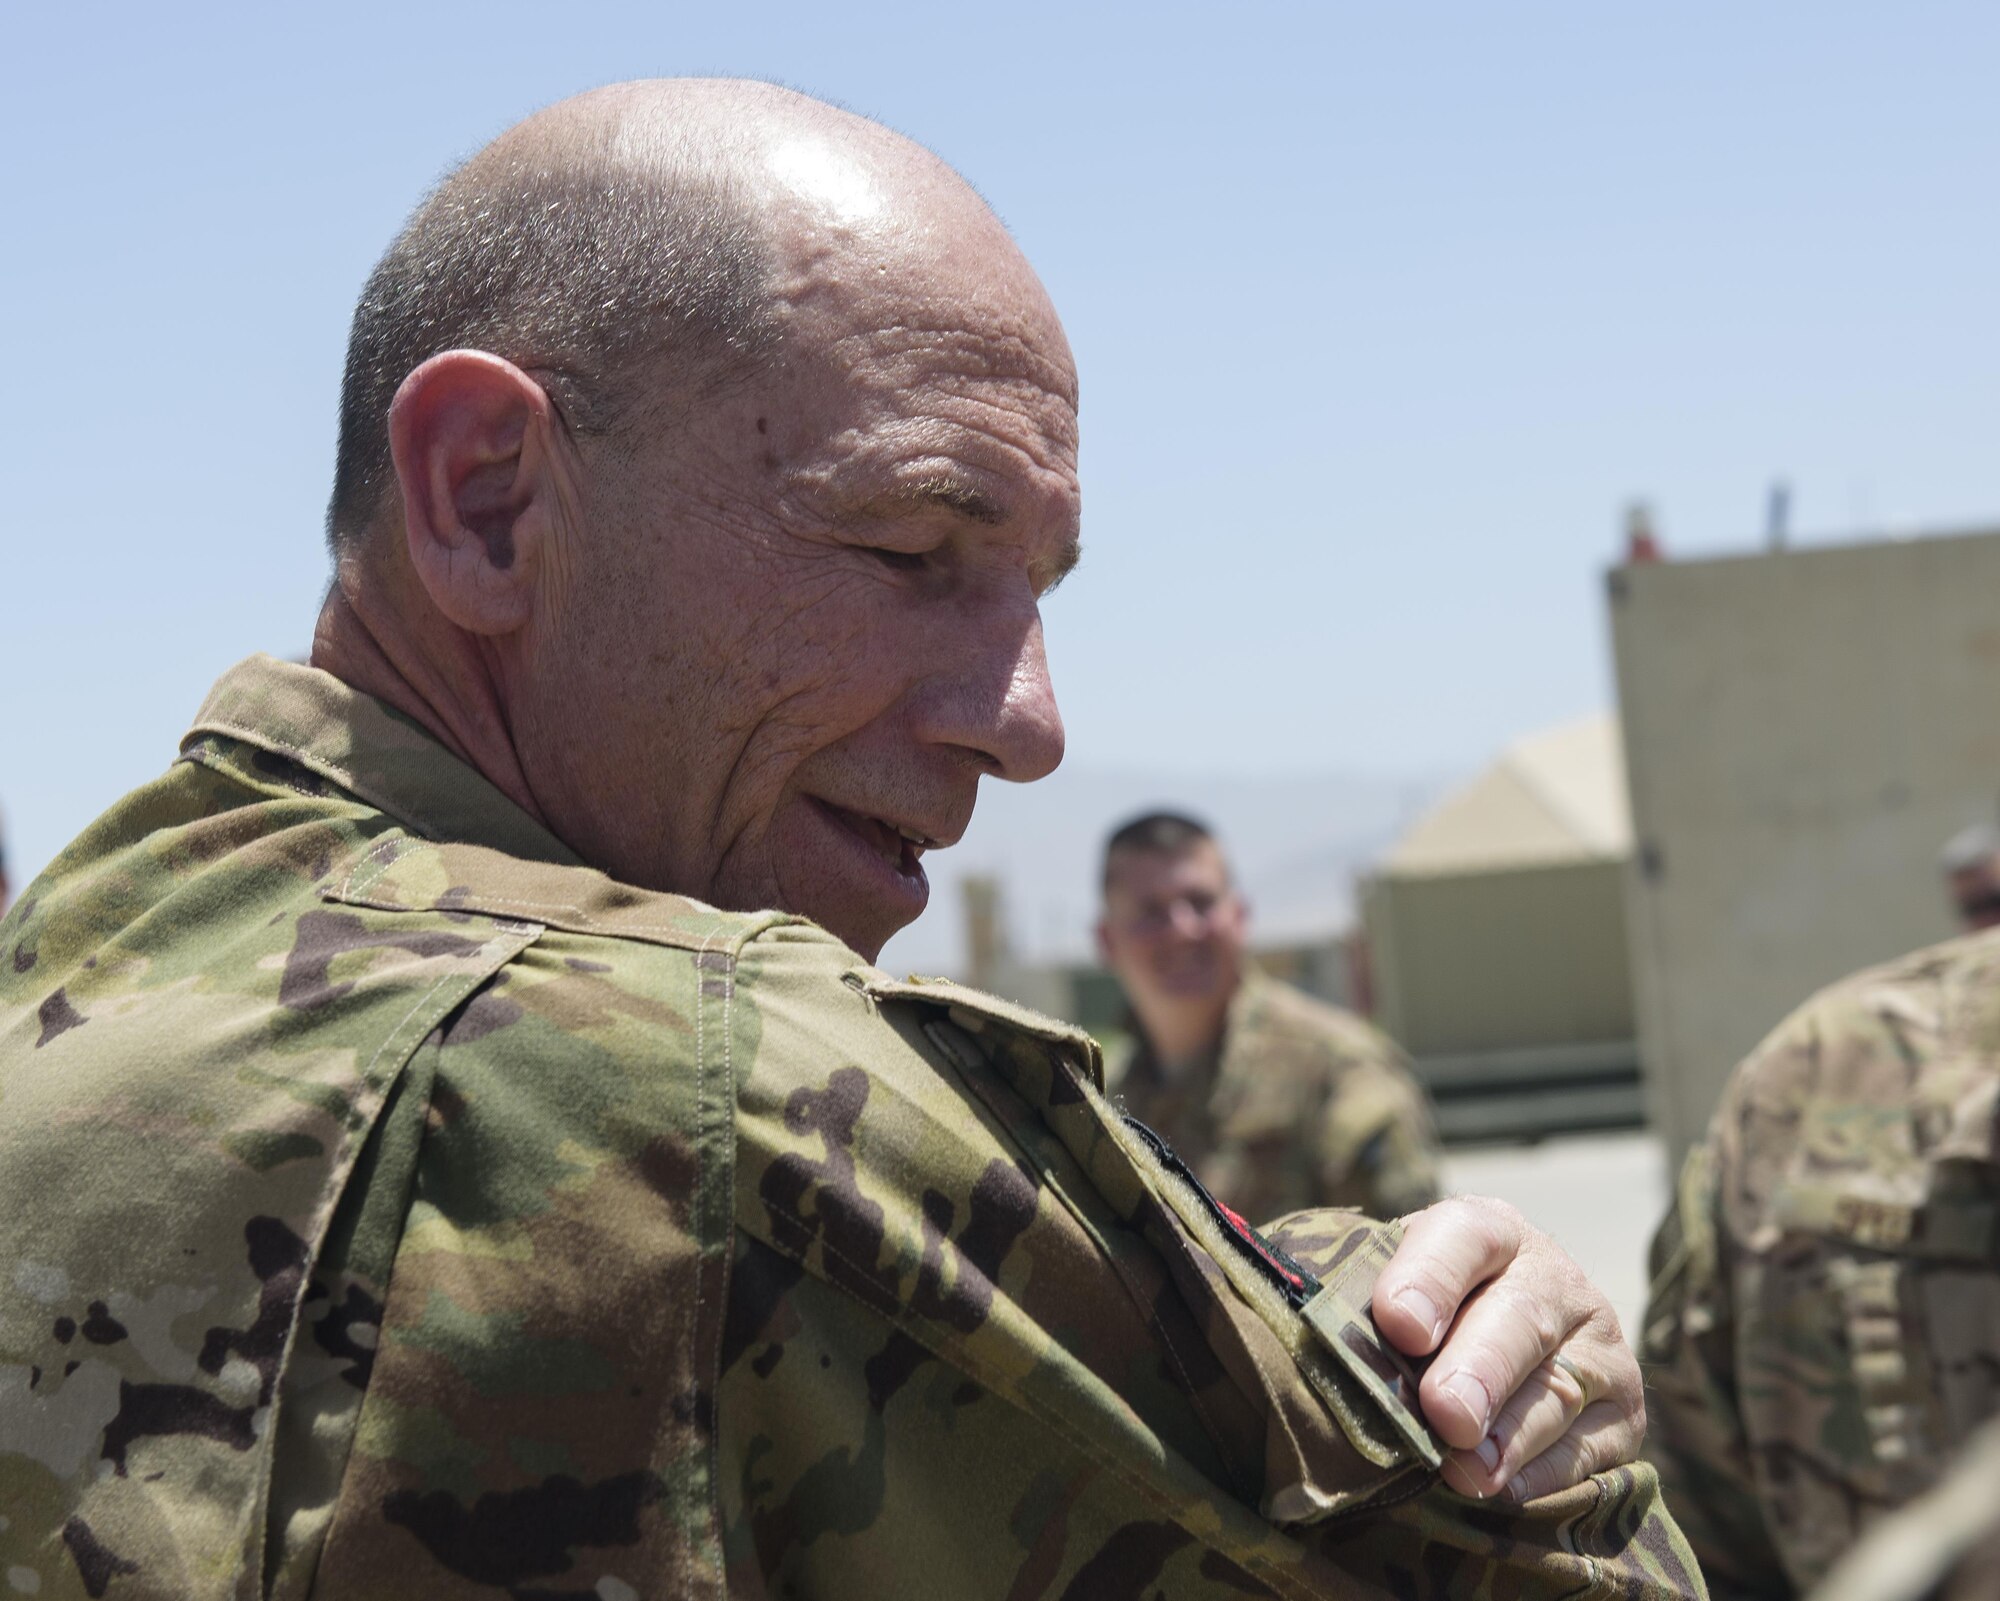 Gen. Mike Holmes, commander of Air Combat Command, places a patch on his Occupational Camouflage Pattern uniform at Bagram Airfield, Afghanistan, May 25, 2017. Holmes met with Bagram Airmen and Soldiers, who gave him their unit patches in appreciation, which he placed on his uniform. (U.S. Air Force photo by Staff Sgt. Benjamin Gonsier)